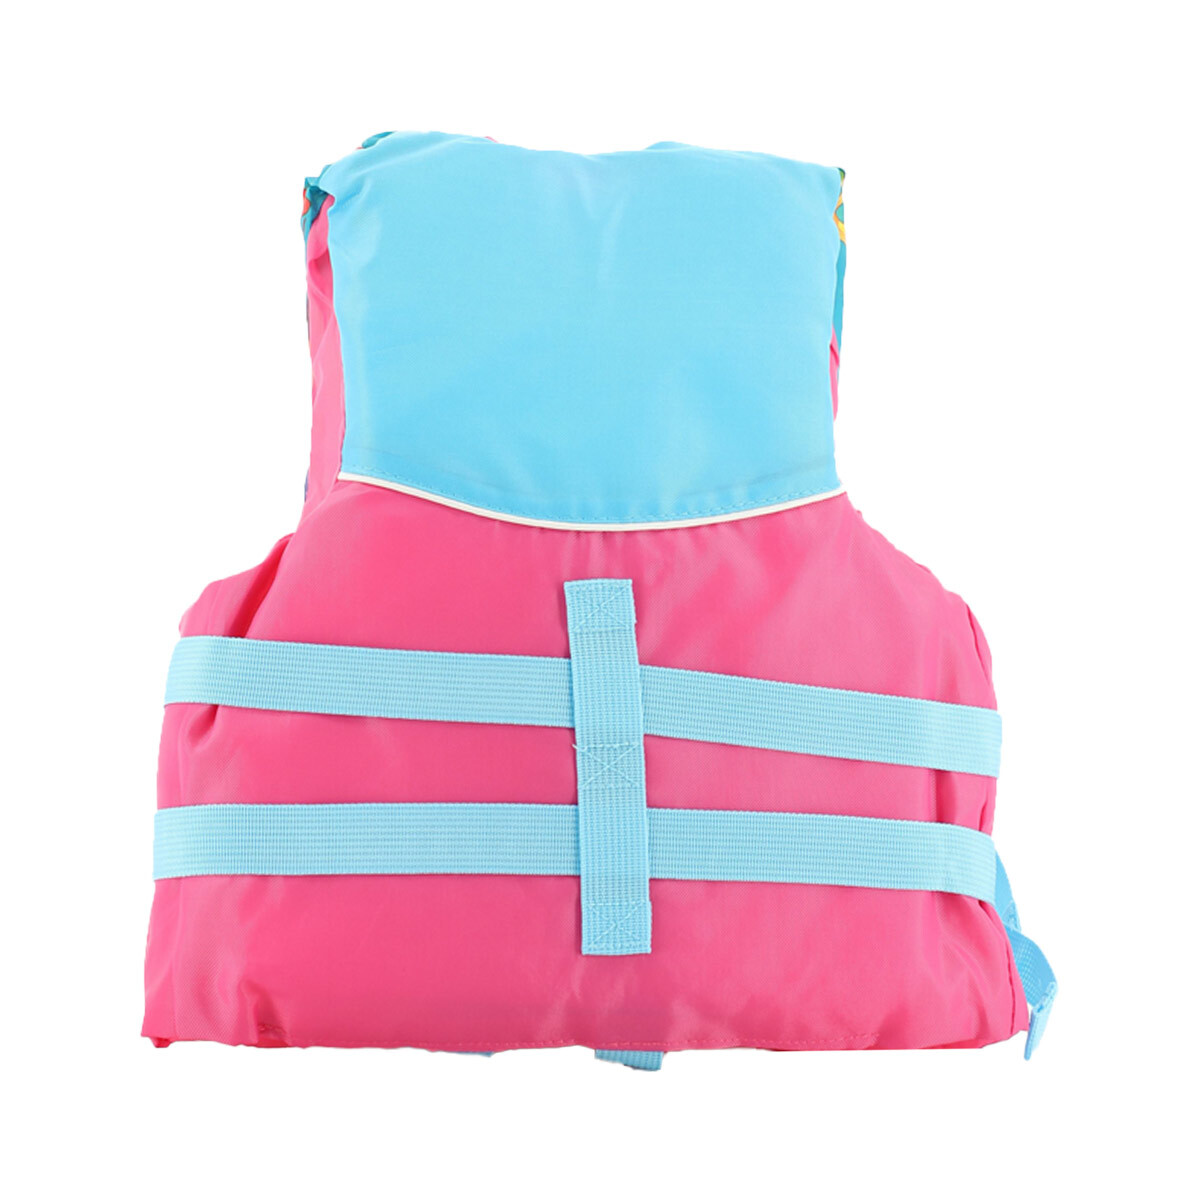 Sports Champion Teen Life Jacket LV200-S Small Assorted Color / Design